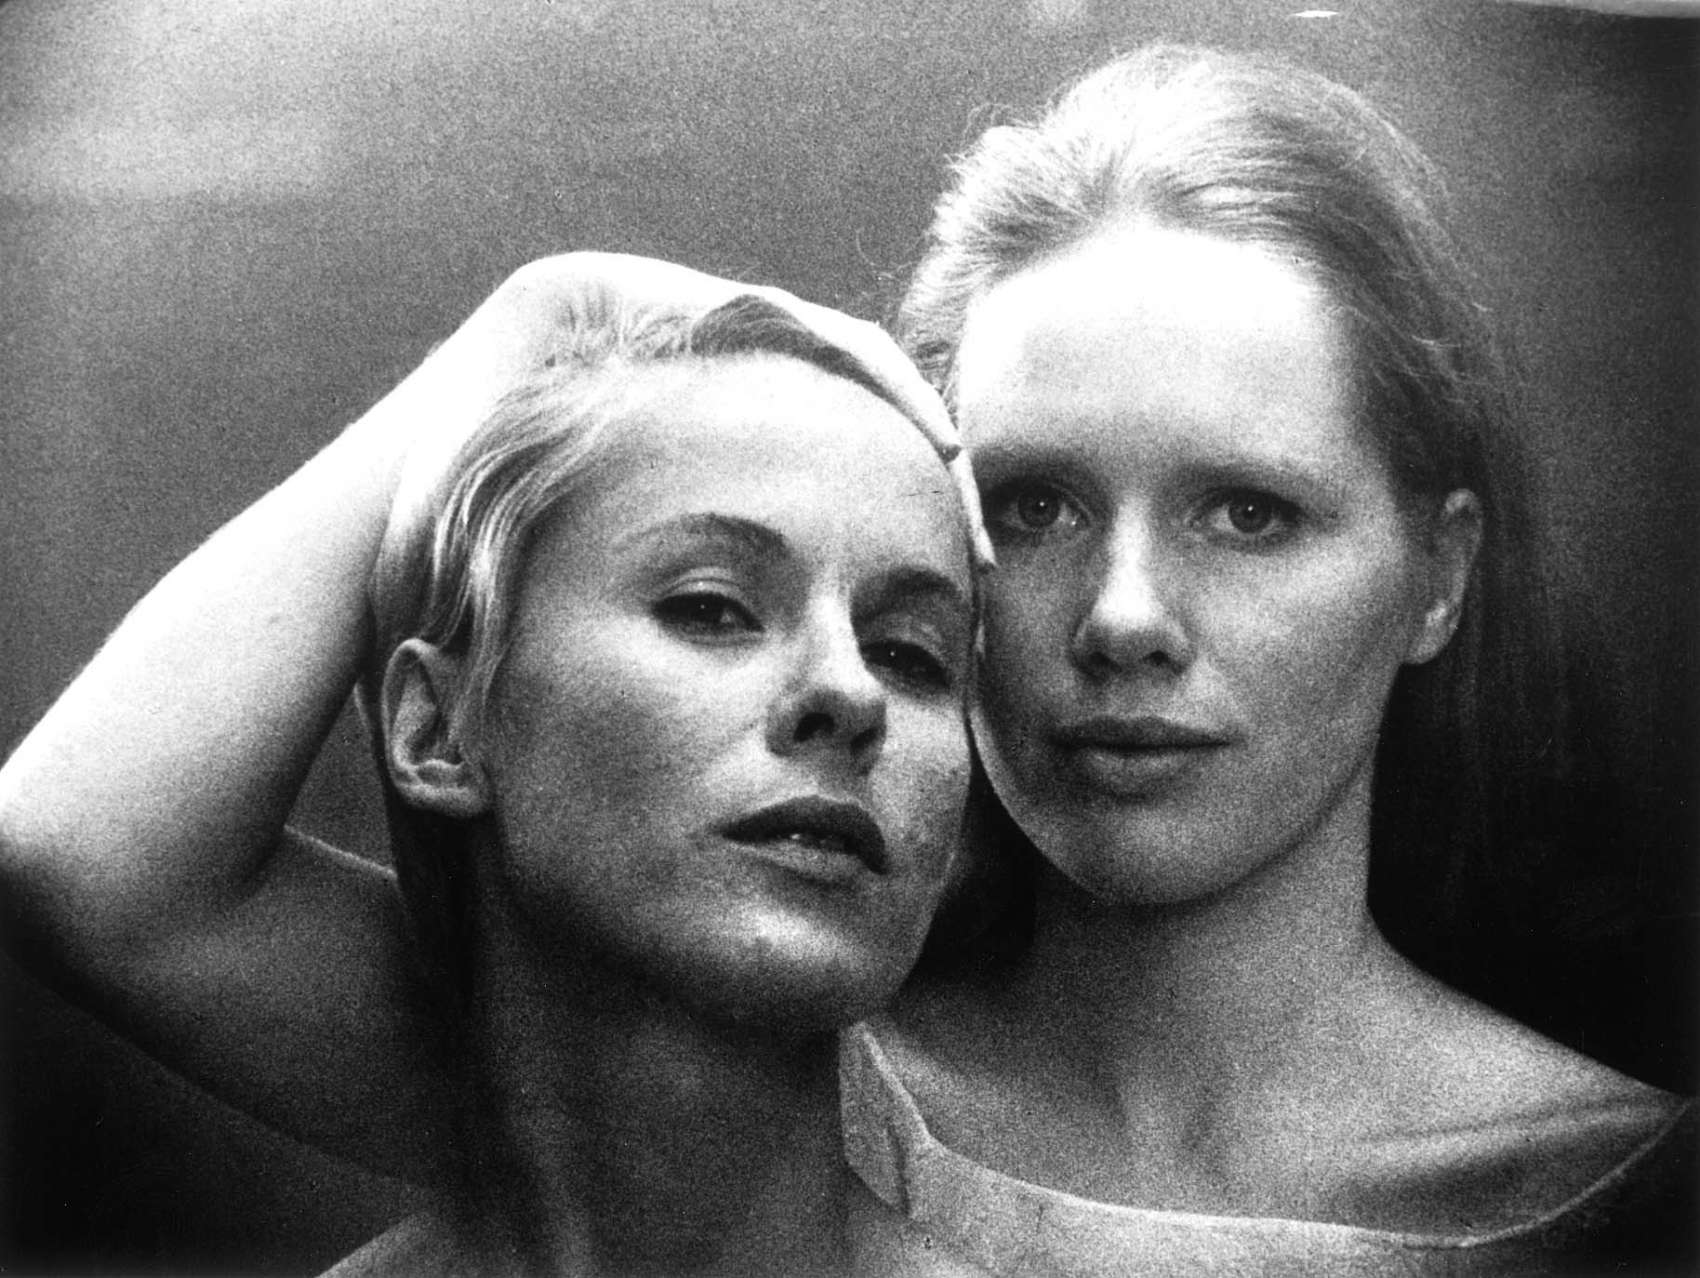 Promo shot from film Persona - head shot of two women one holding the other's hair